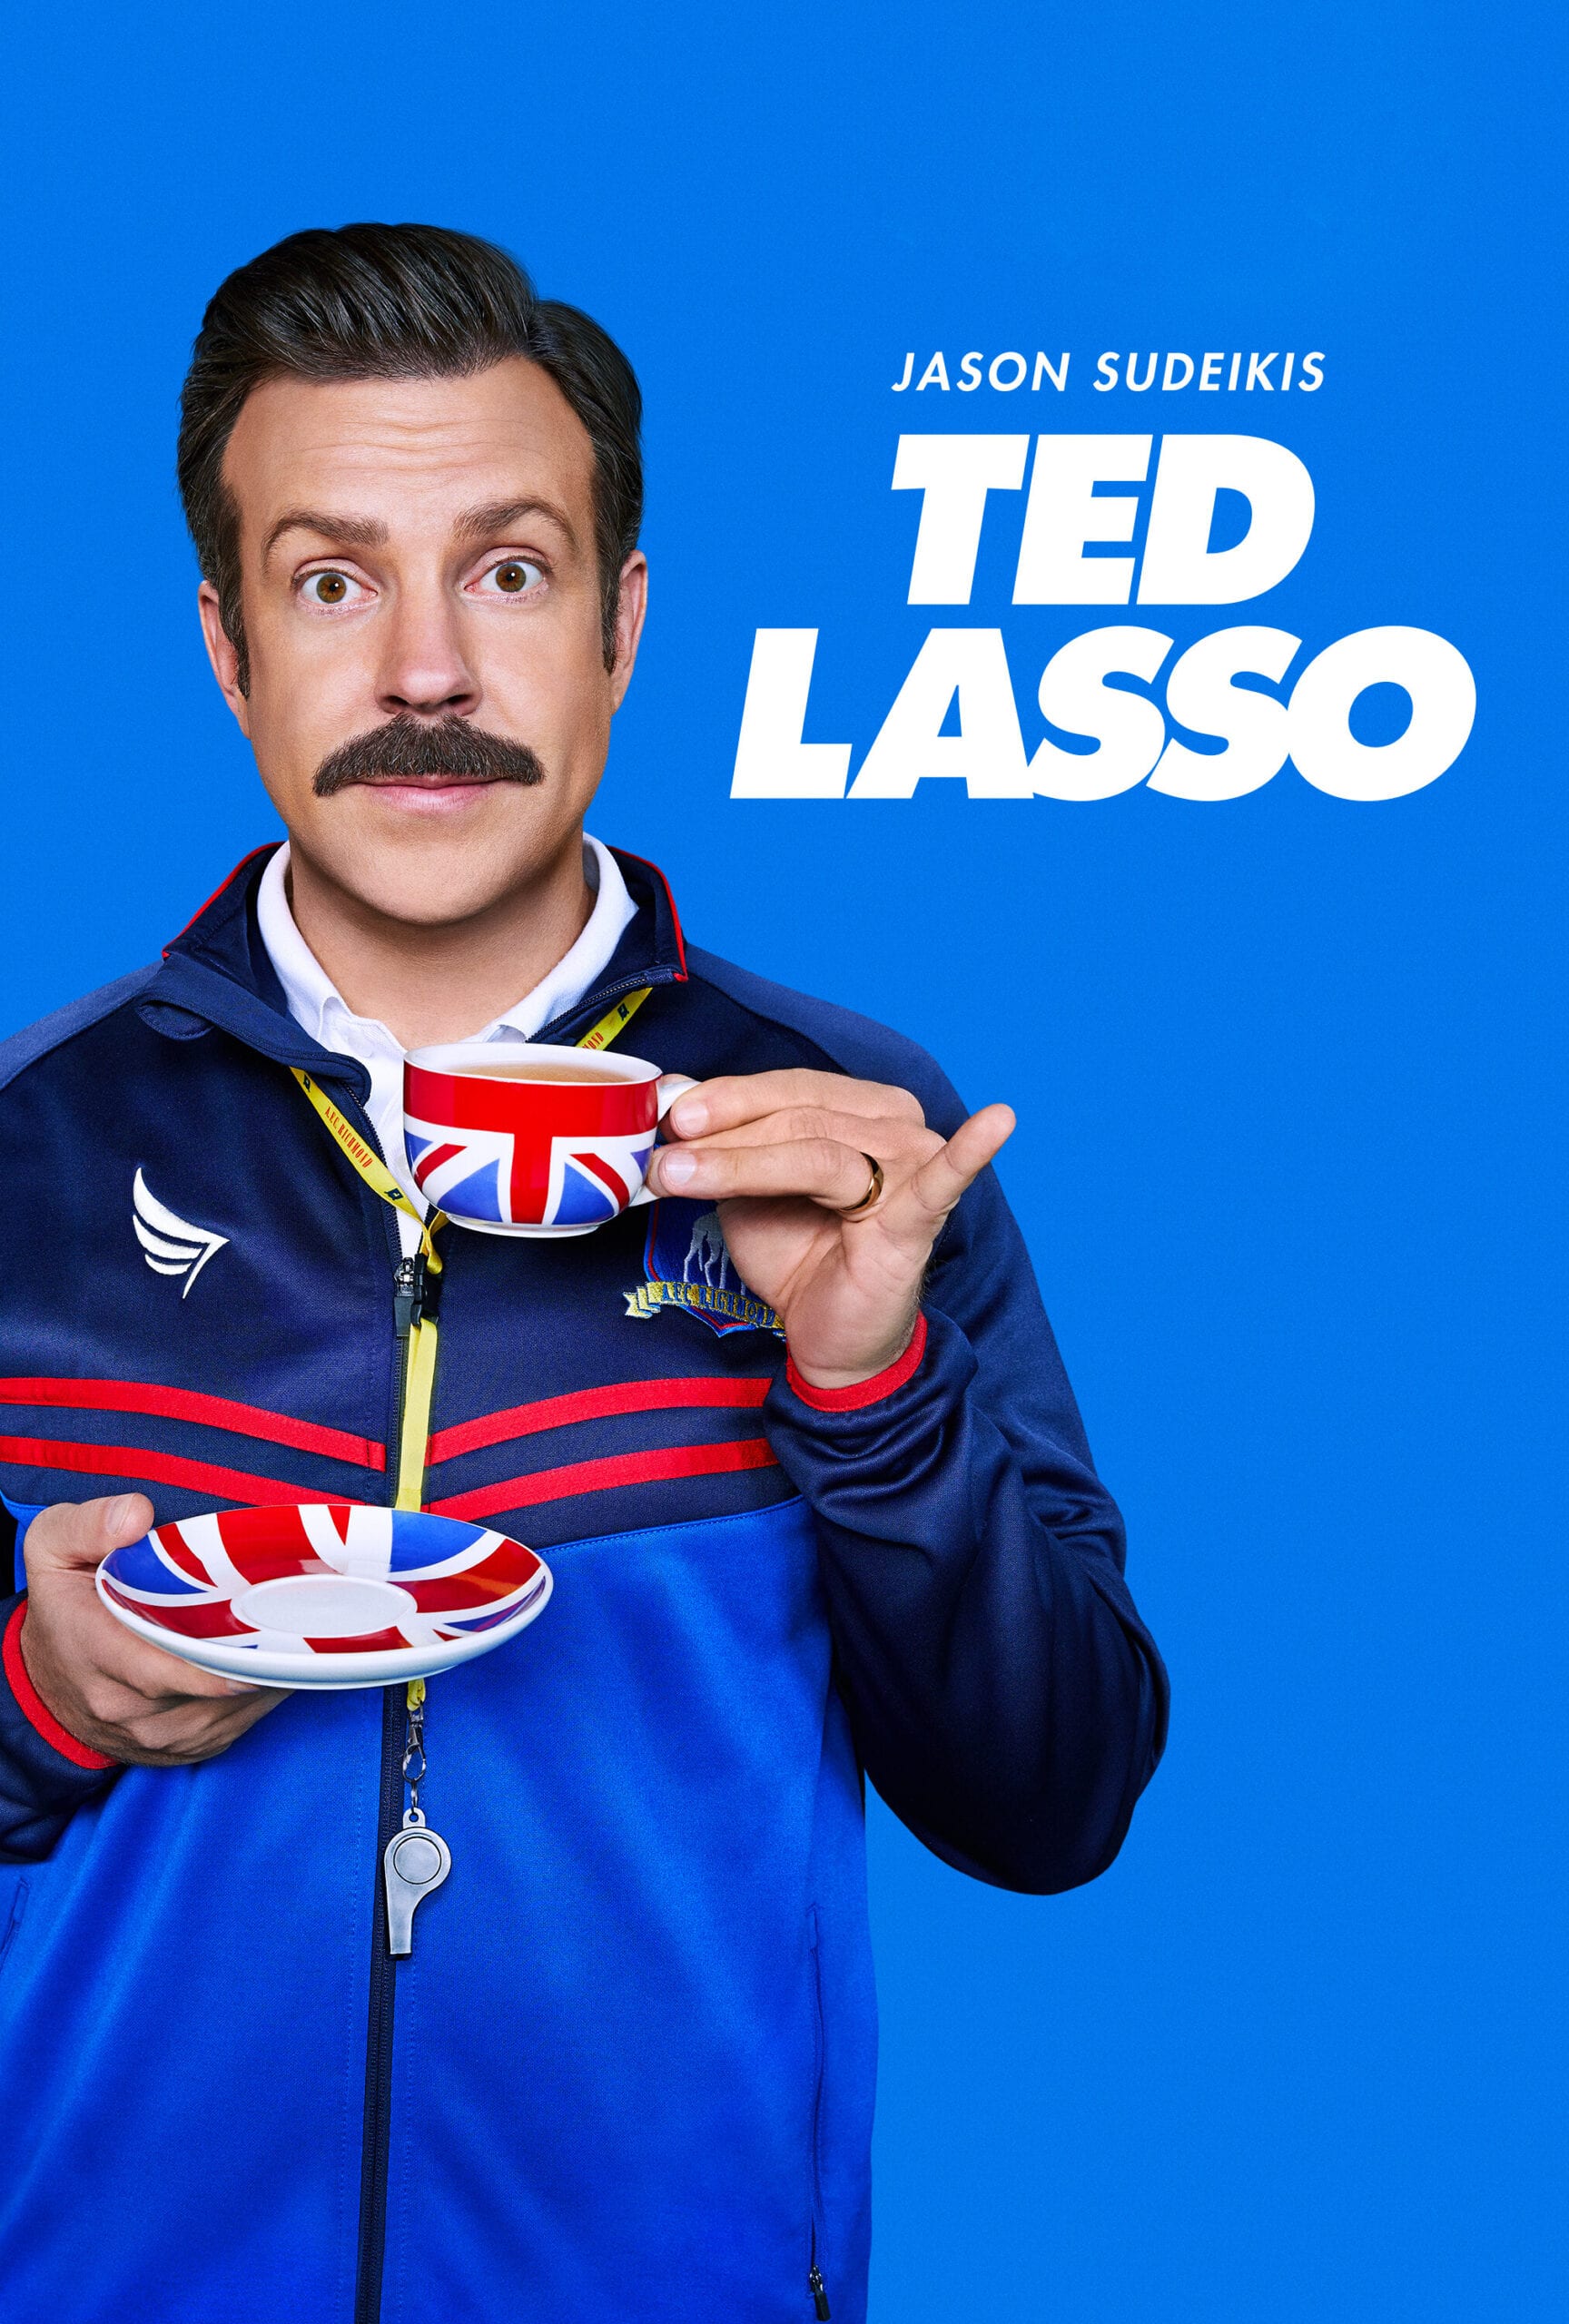 Ted Lasso teaser image